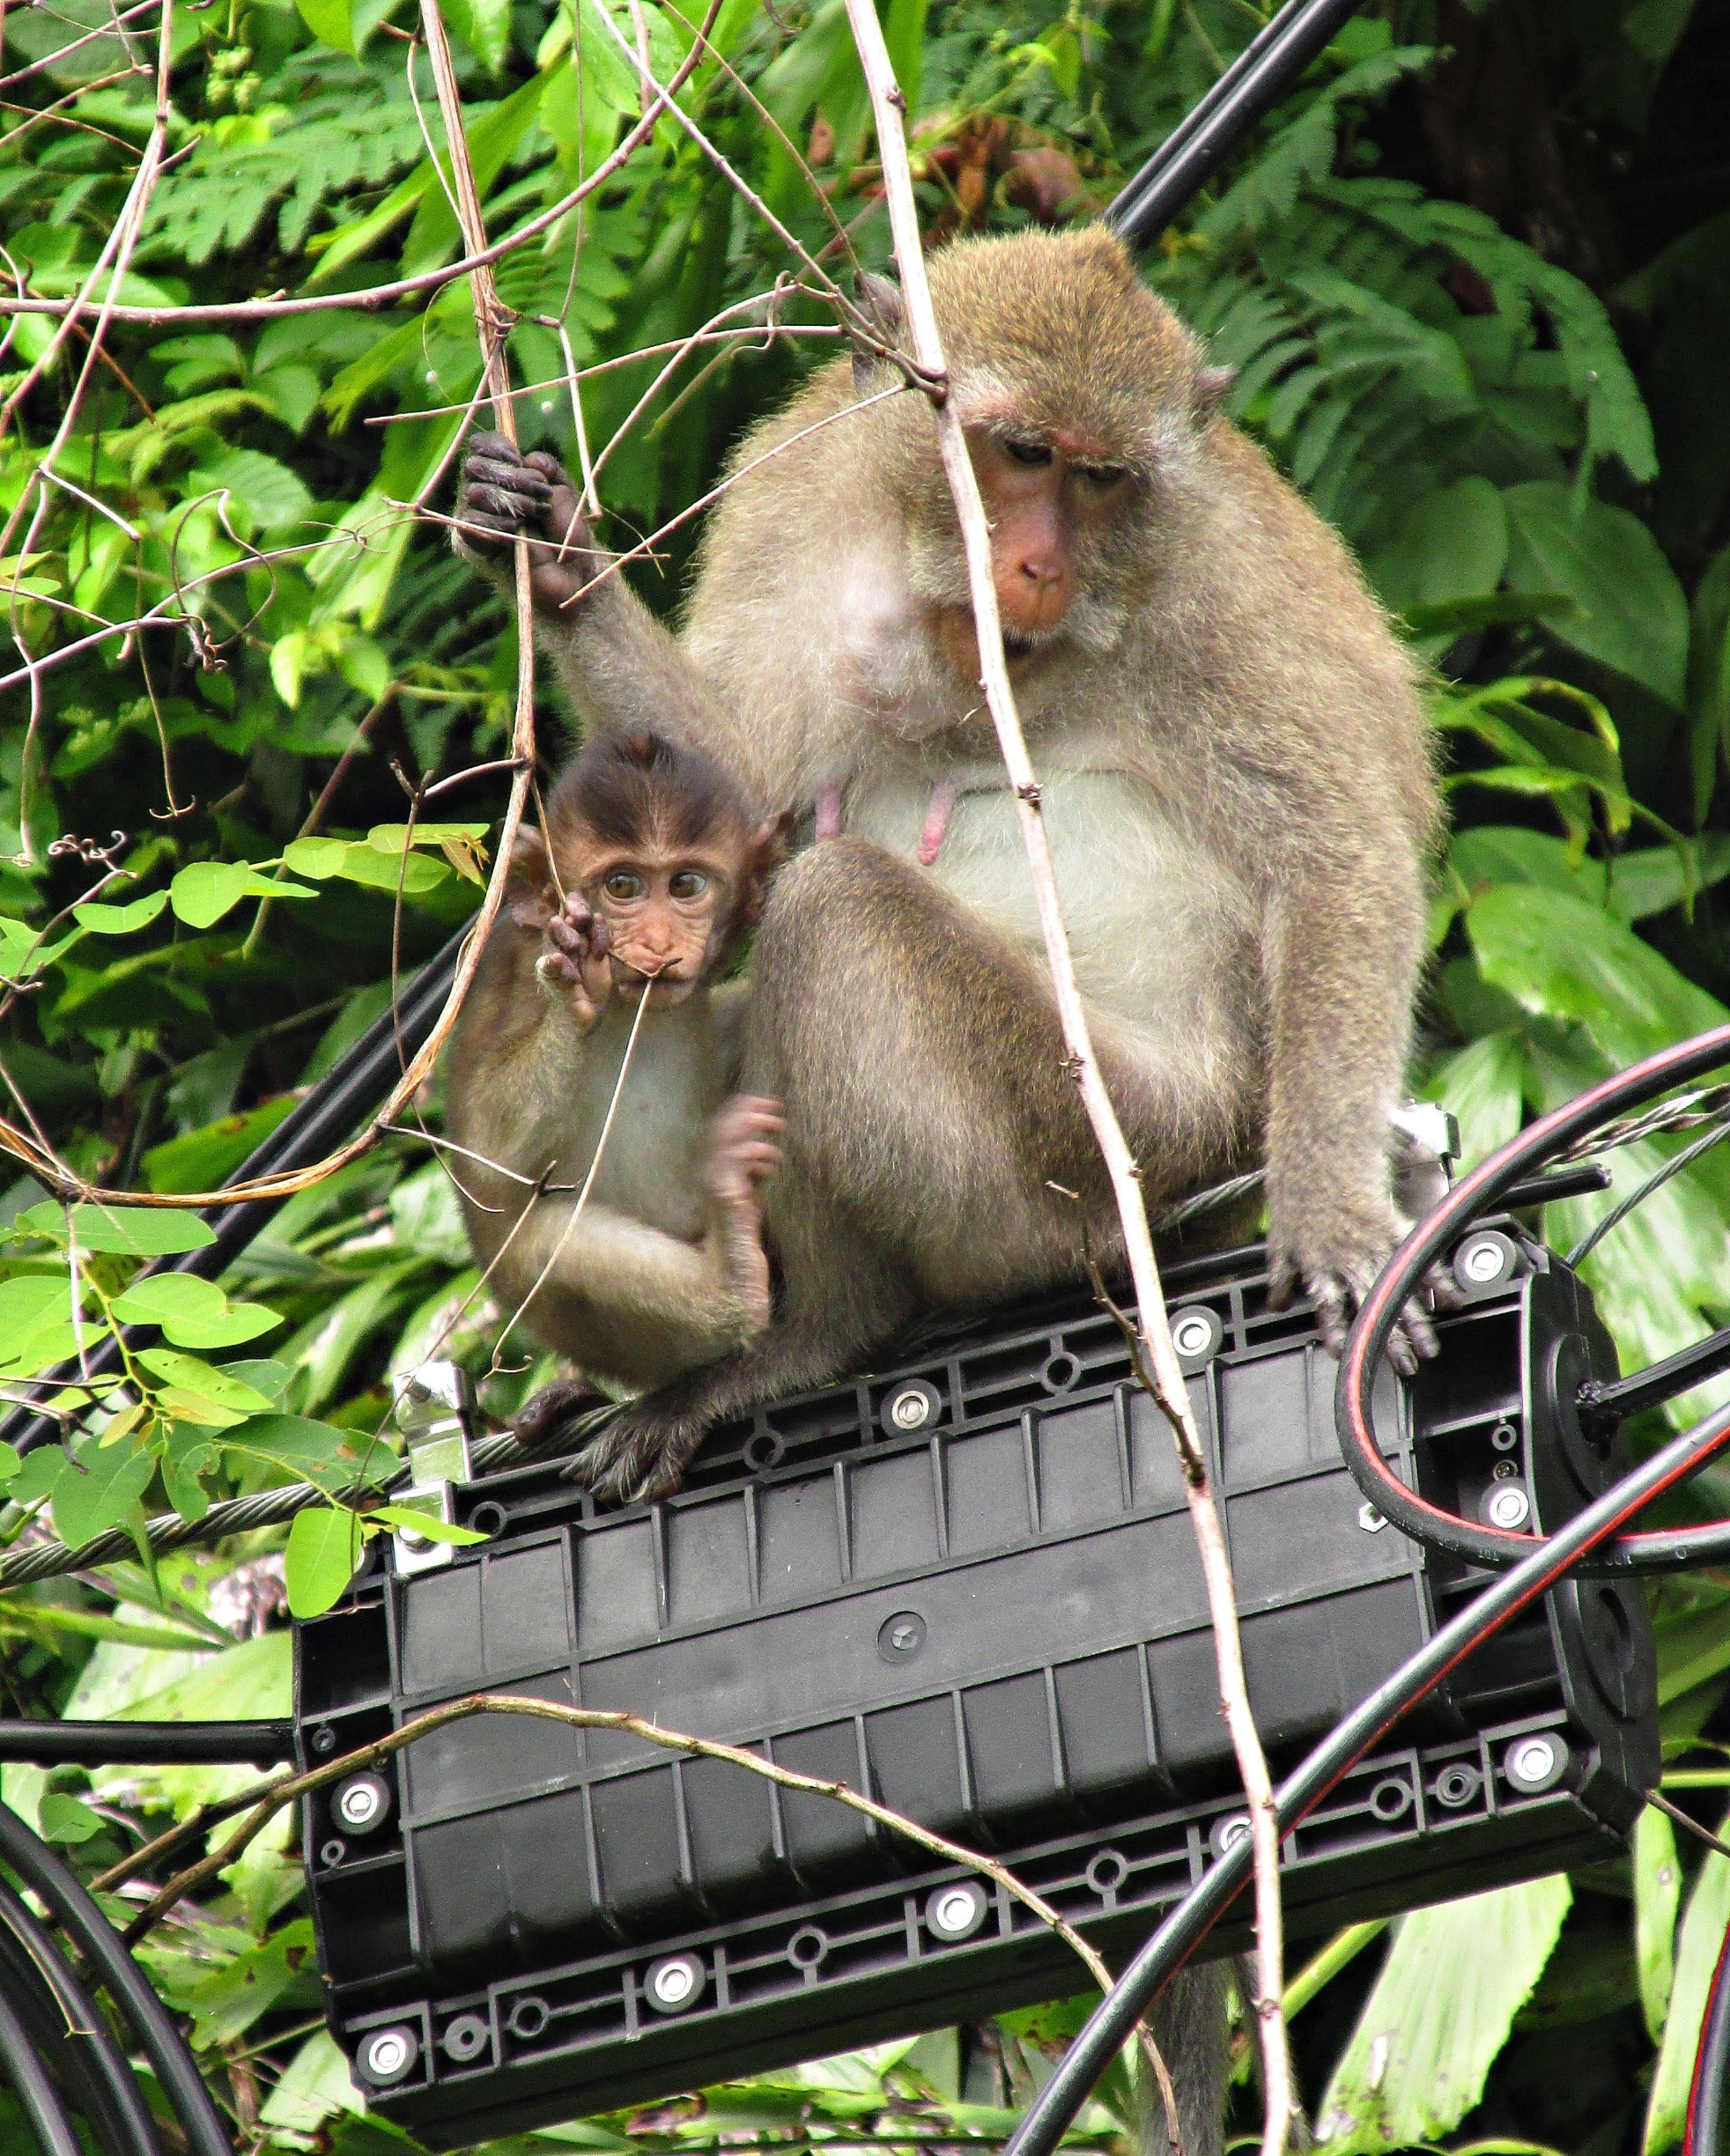 It's a ten minute walk from the village of Lonely Beach to the actual beach, and it's where the jungle meets the road.  The power lines here are often filled with macaques at play and looking for easy food.

#thailand  #kohchang #captivatingcreatures